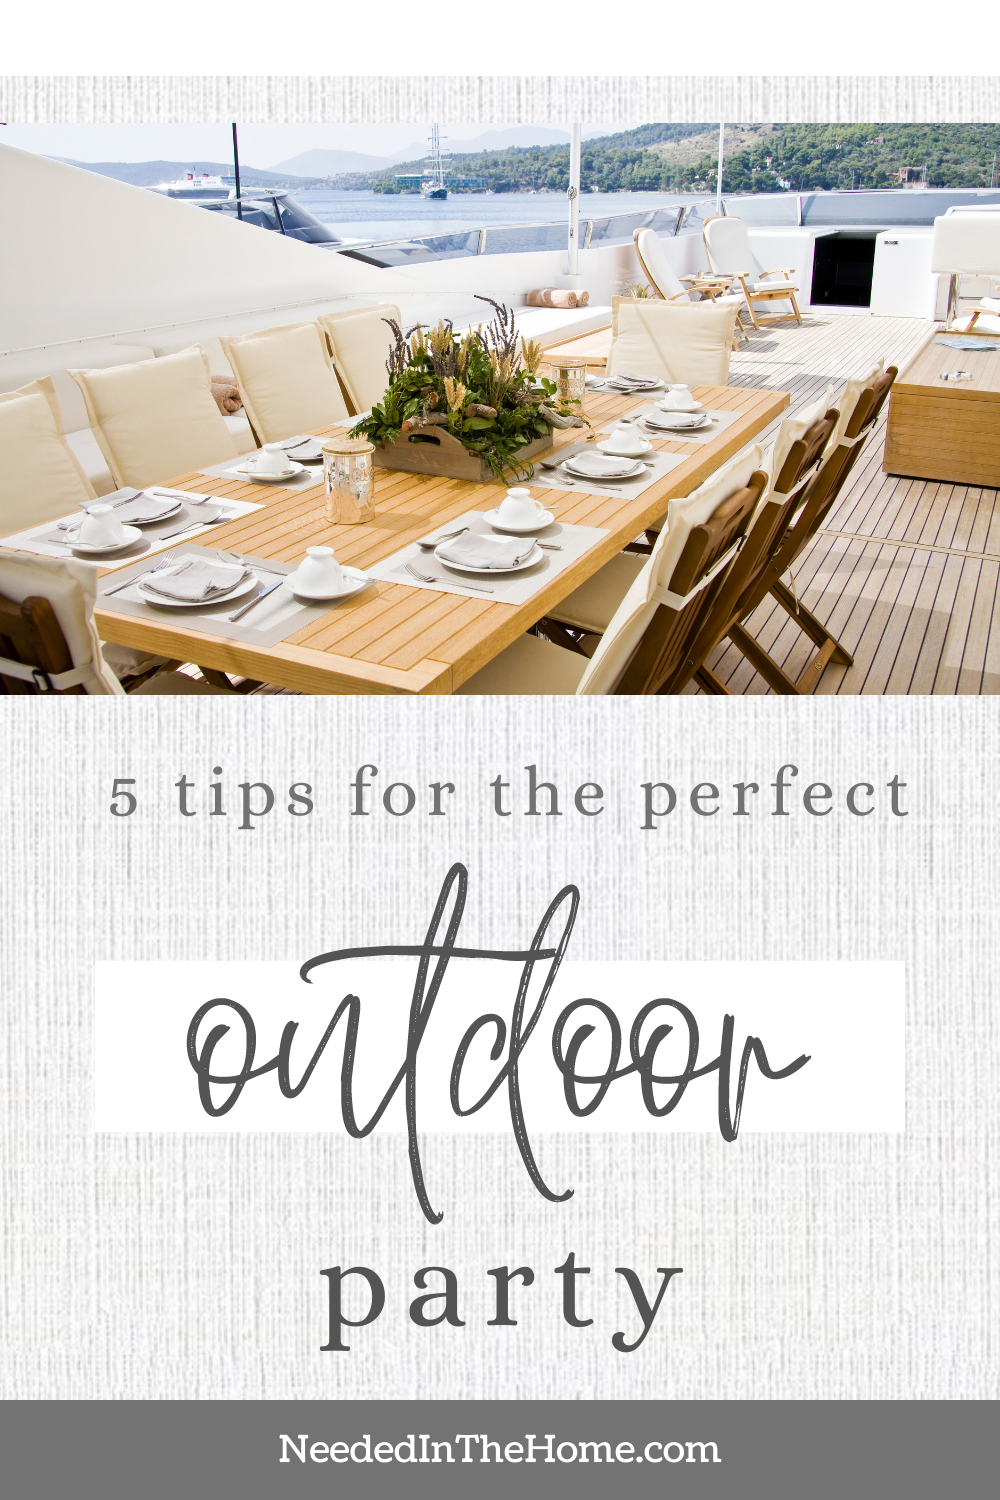 pinterest-pin-description 5 tips for the perfect outdoor party table and chairs on a boat deck with more houseboats in background neededinthehome